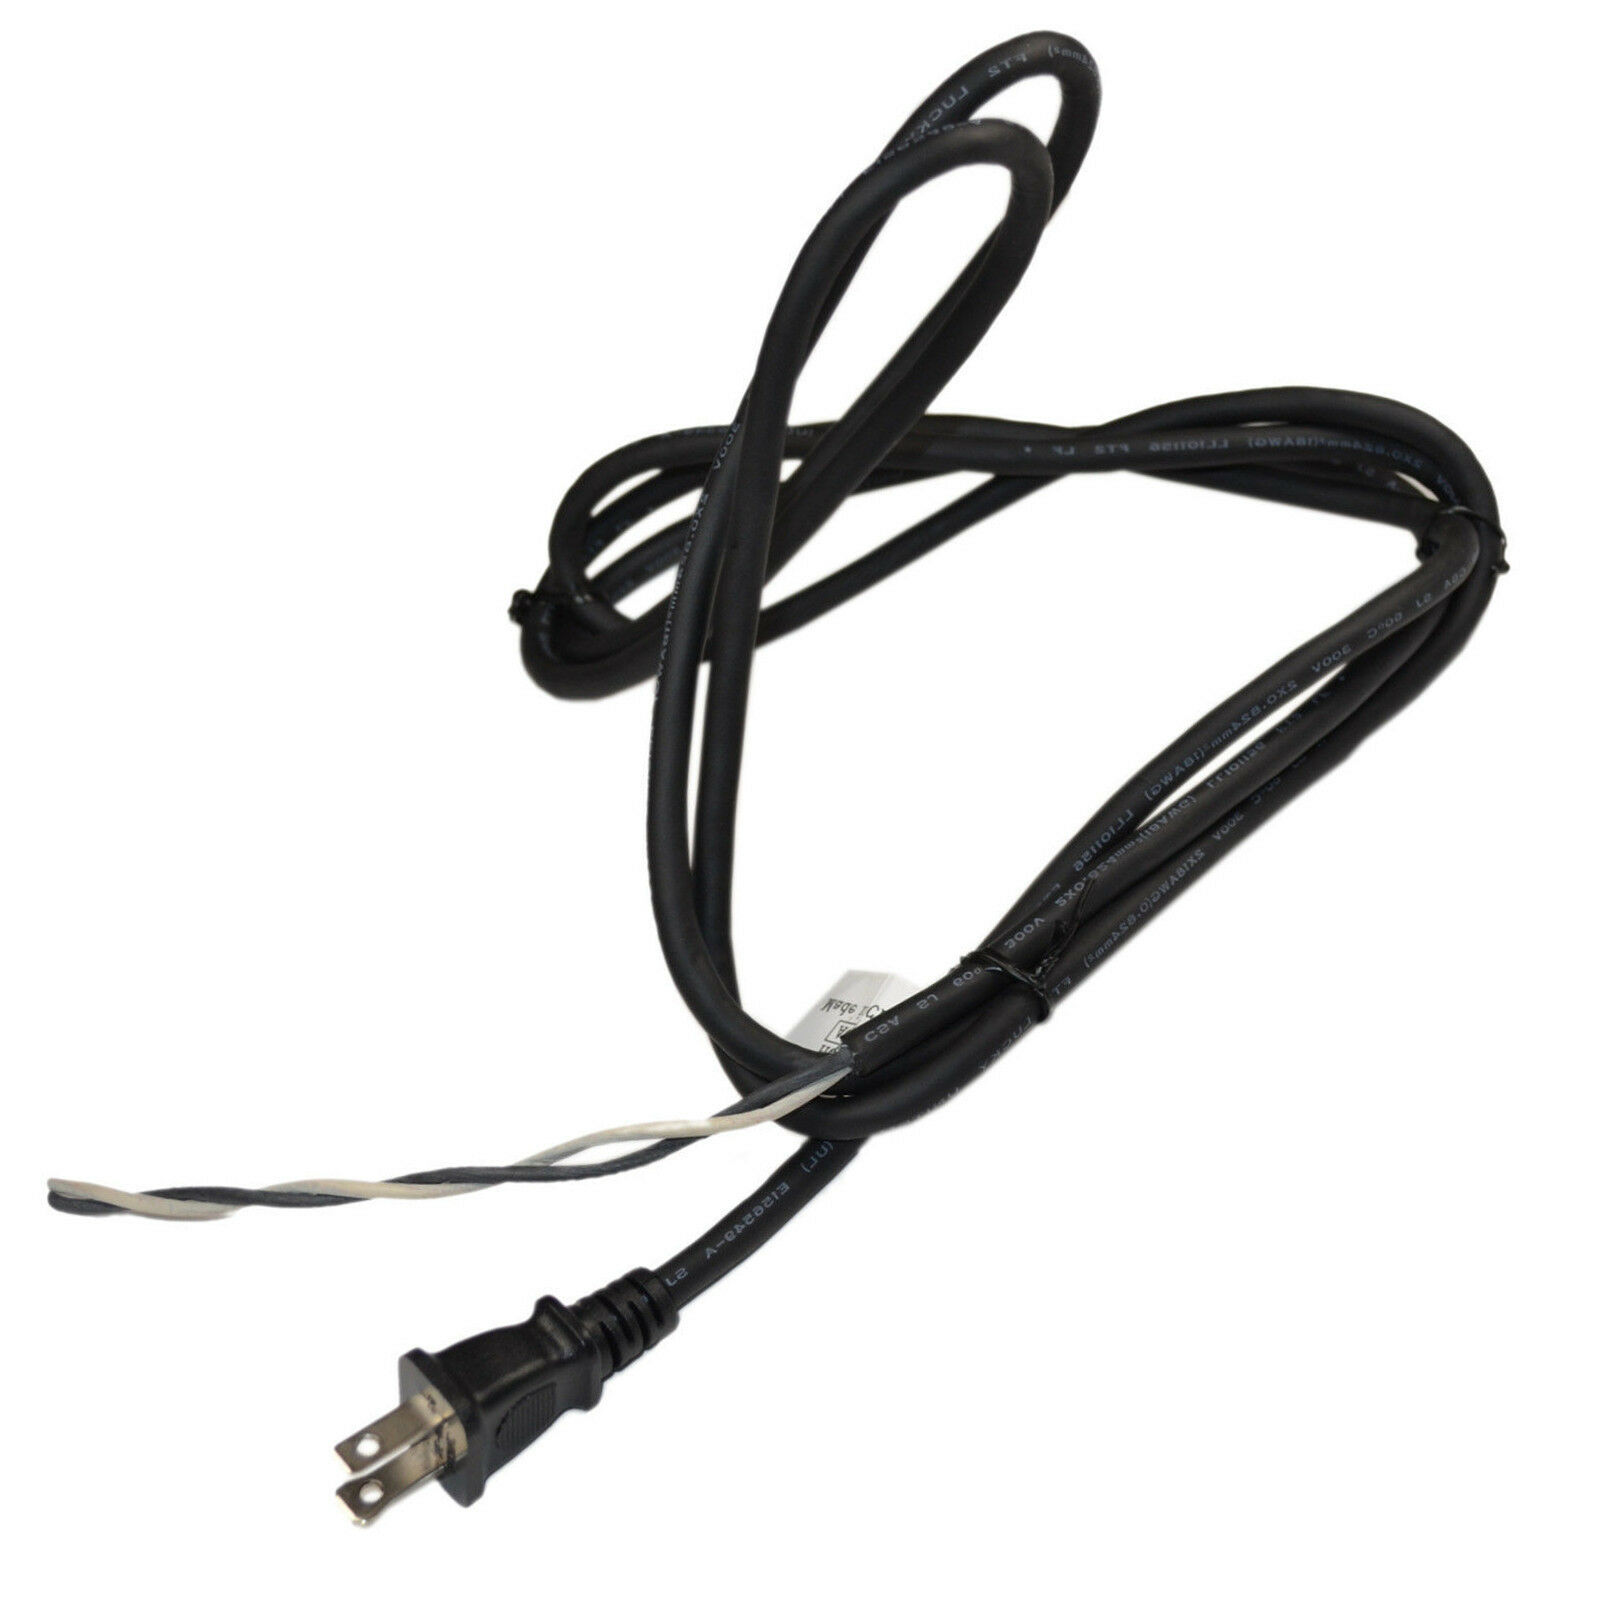 AC Power Cord for Makita 664064-4 Replacement Mains Cable Repair Model: 664064-4 Replacement Power Source: Corded Ele